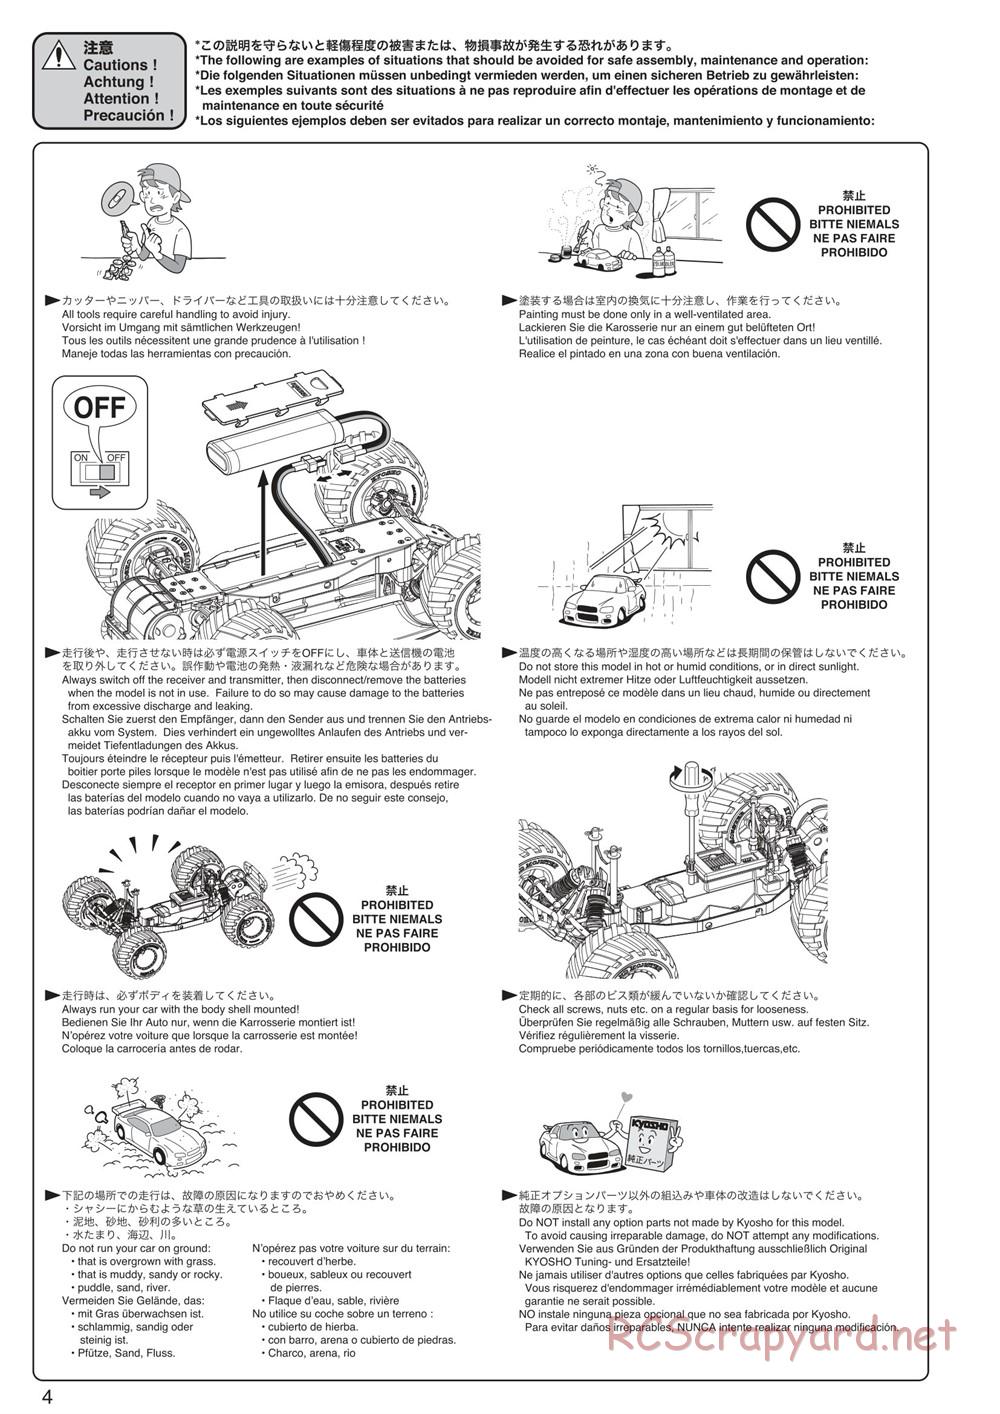 Kyosho - Monster Tracker EP - Manual - Page 4